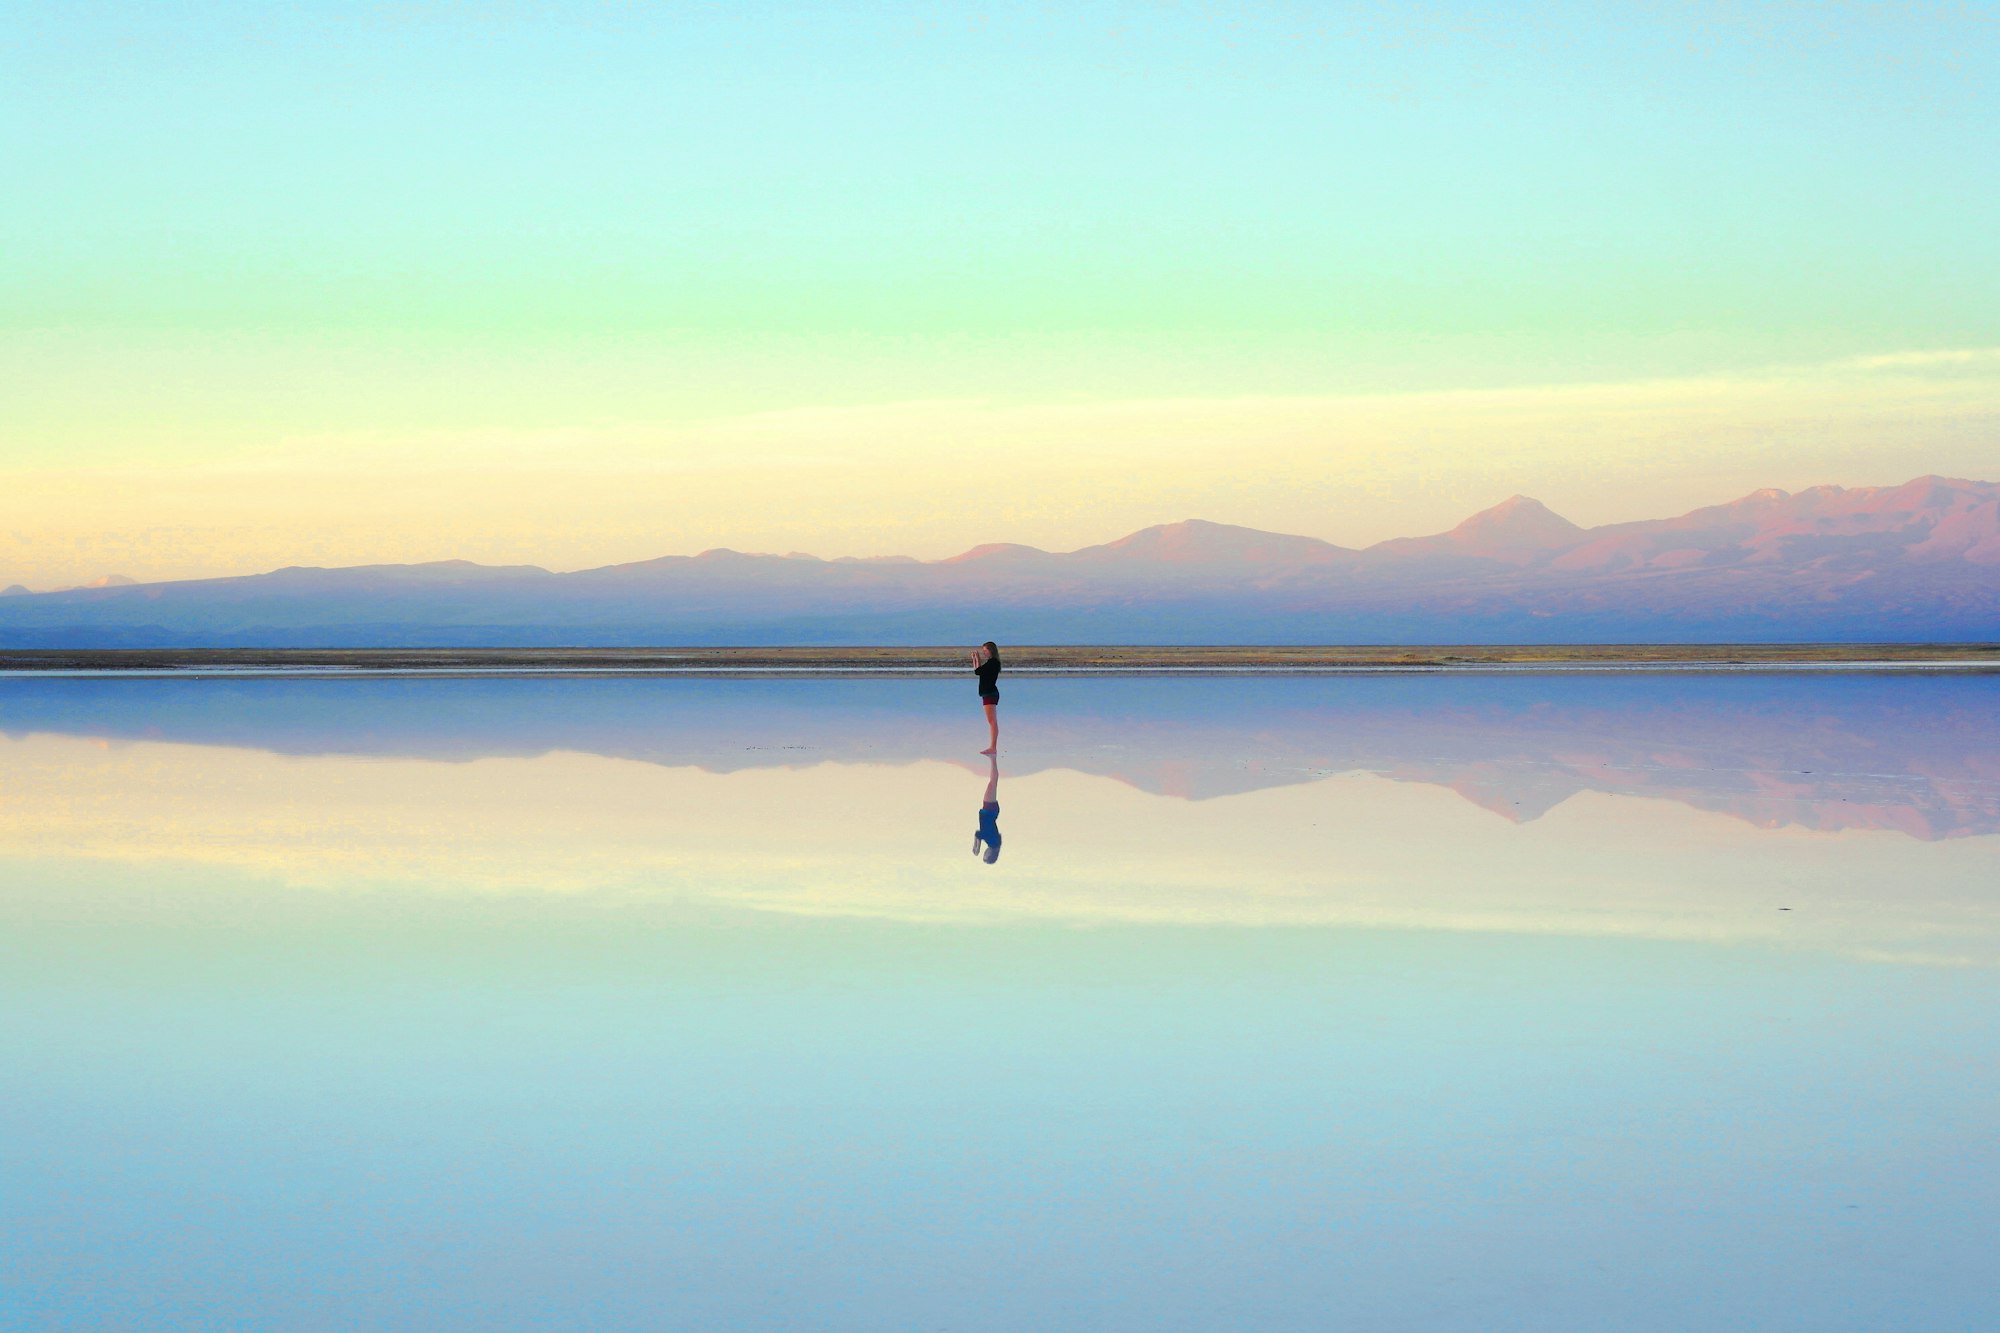 Woman taking a picture in the middle of a "salar"/lake in the dessert of Atacama, Chile.